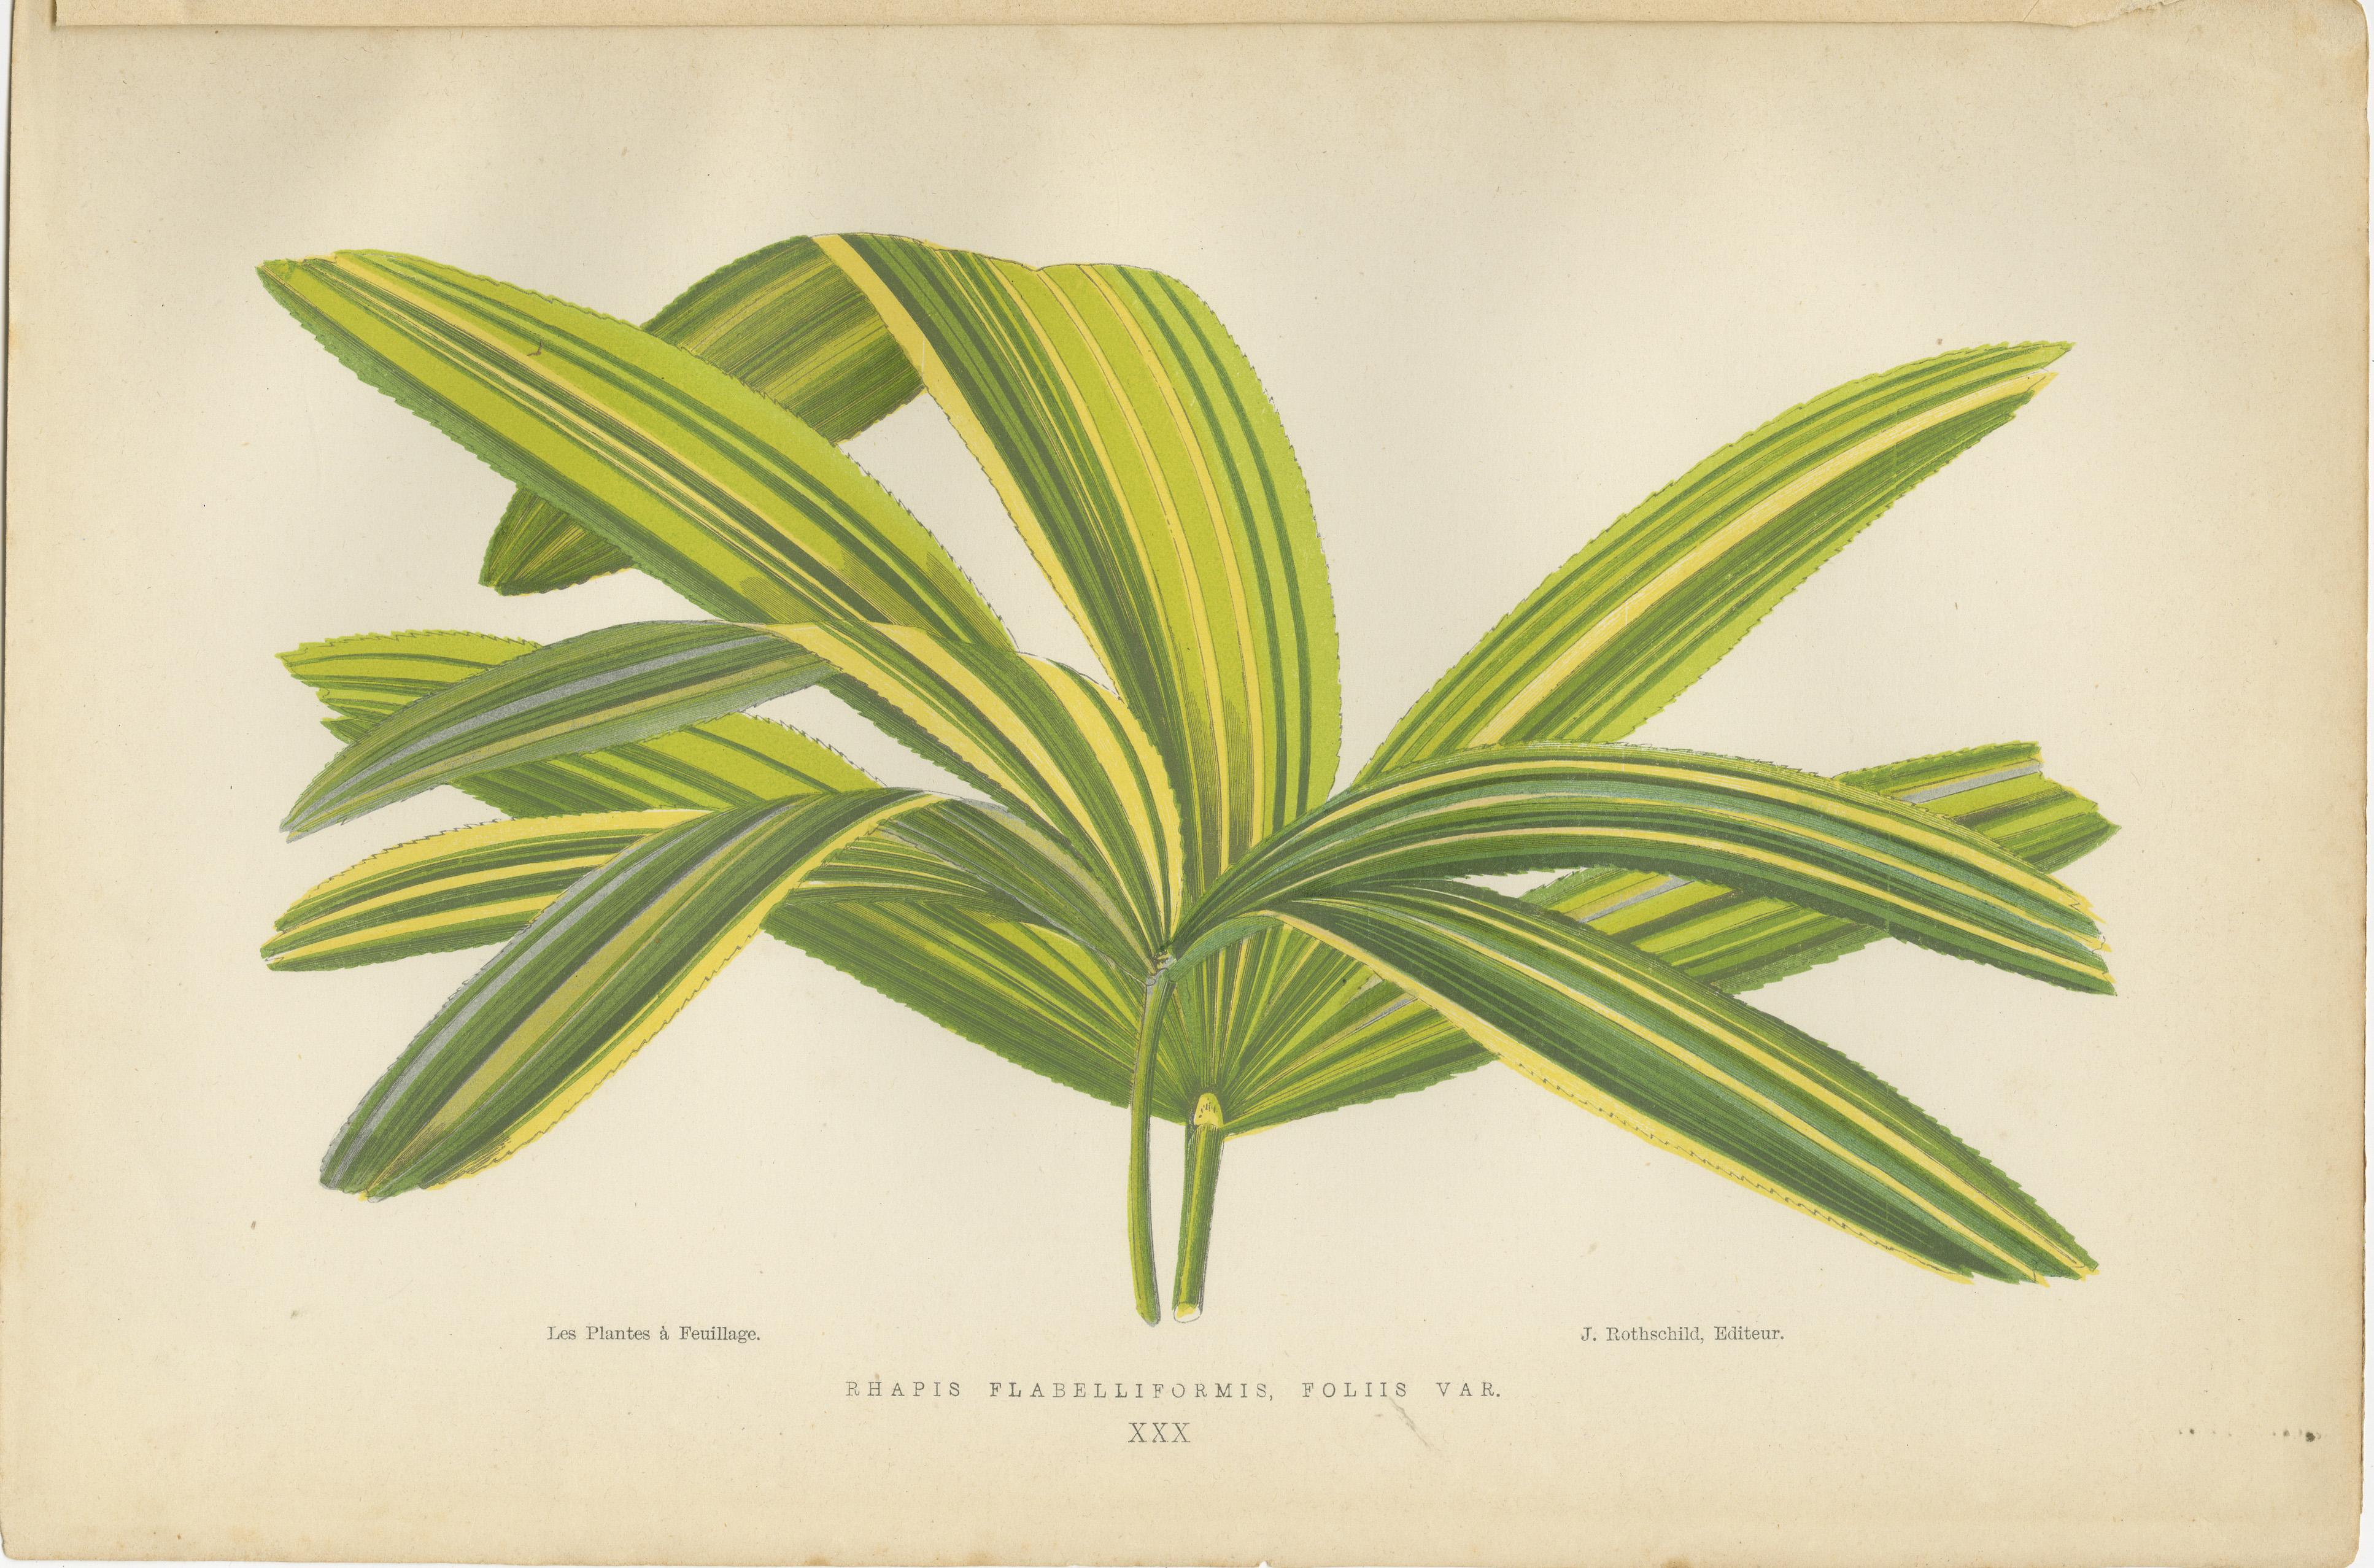 These botanical prints from 